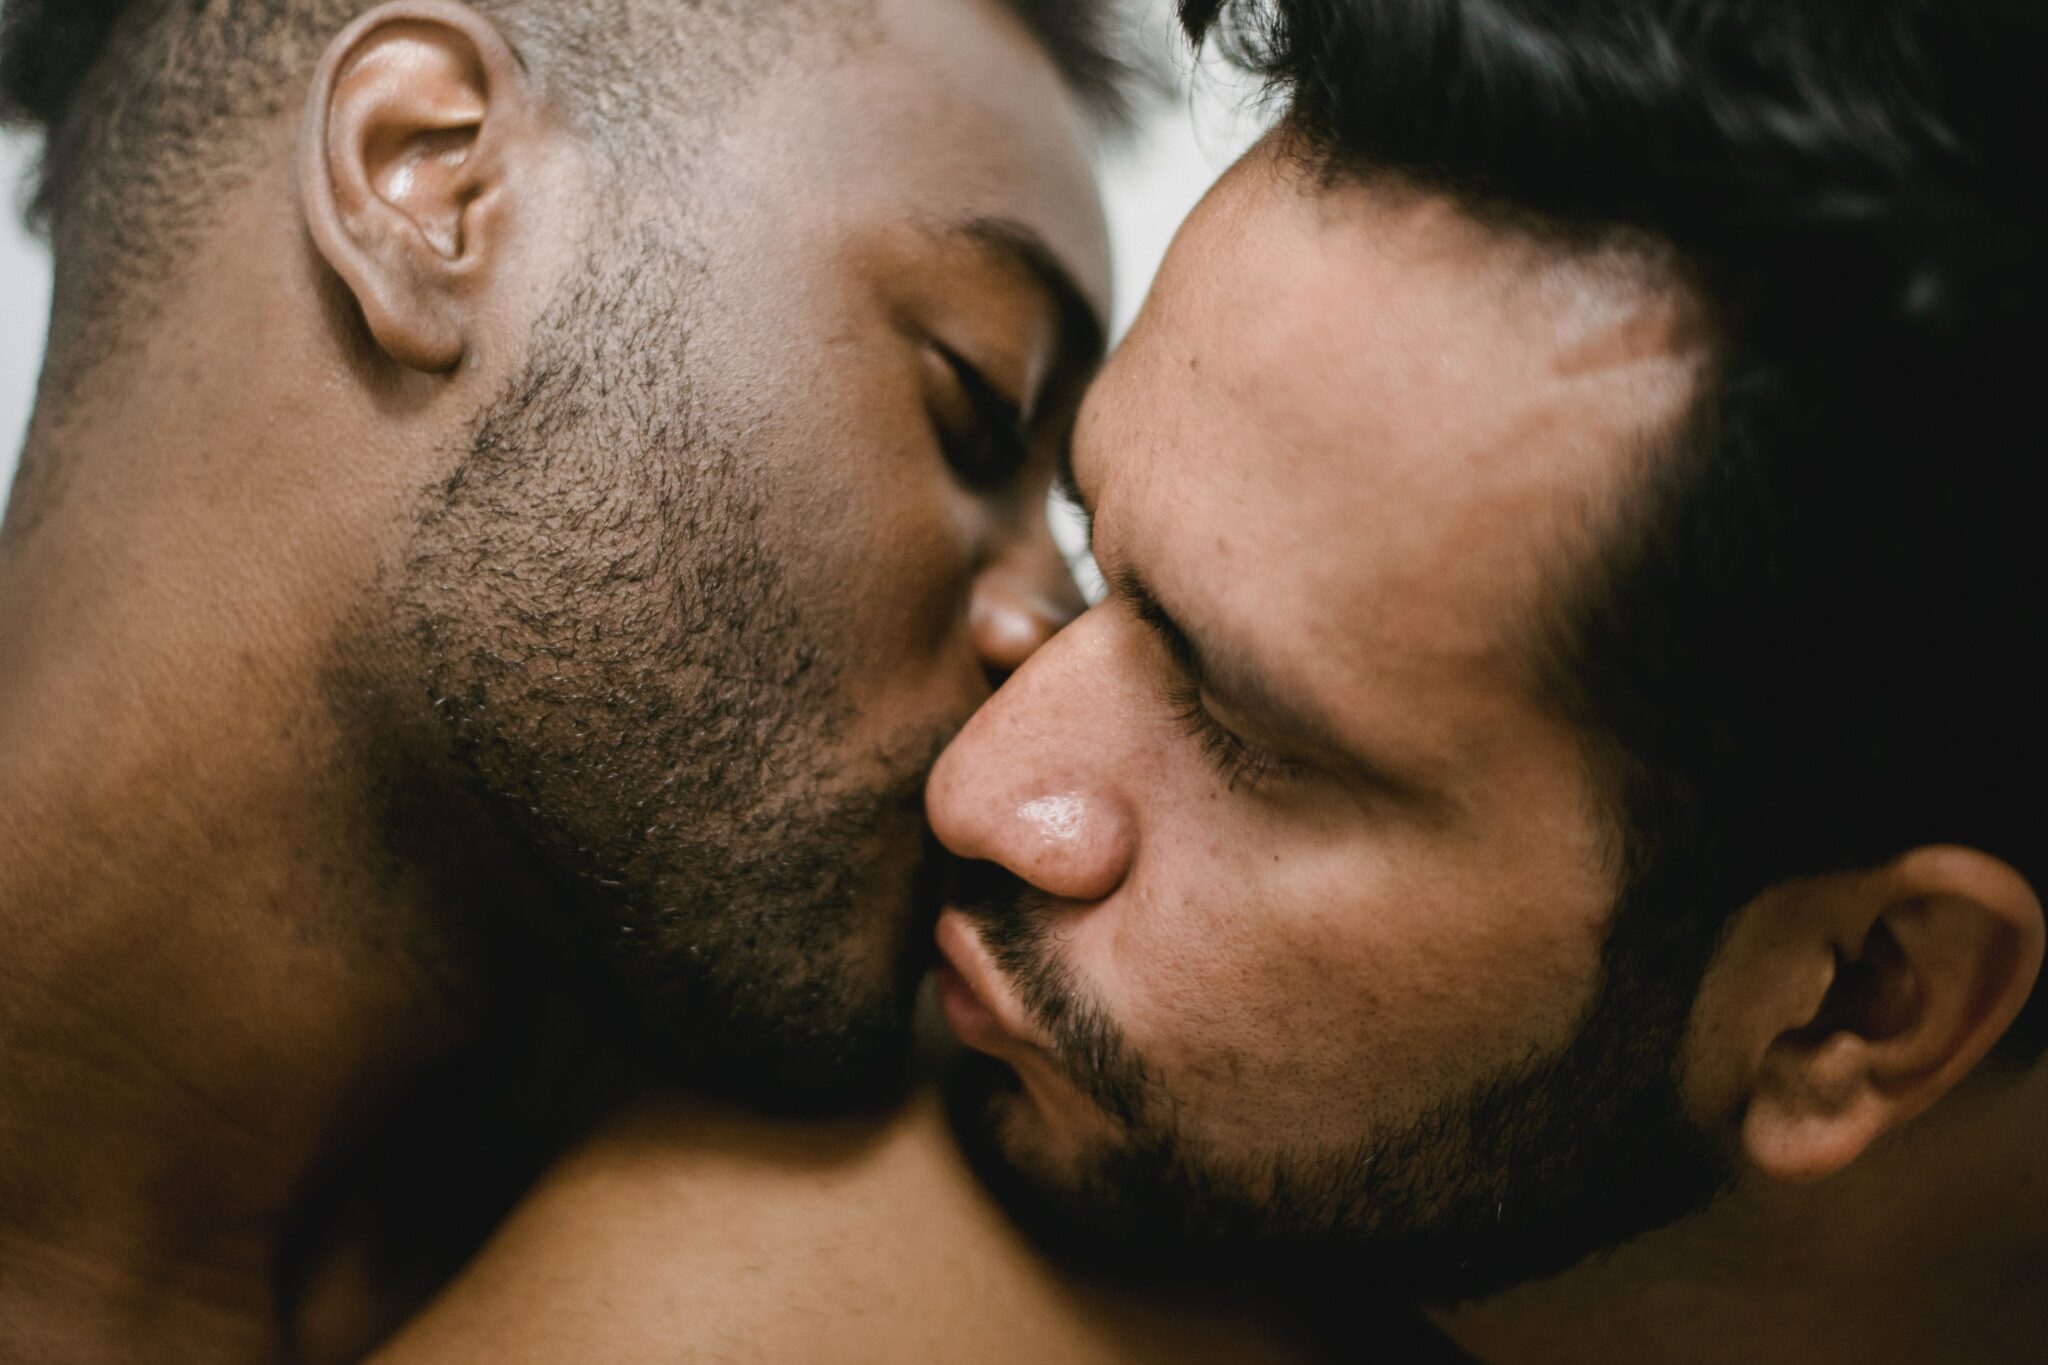 Harsh reality of being a gay 'side' in a top or bottom world